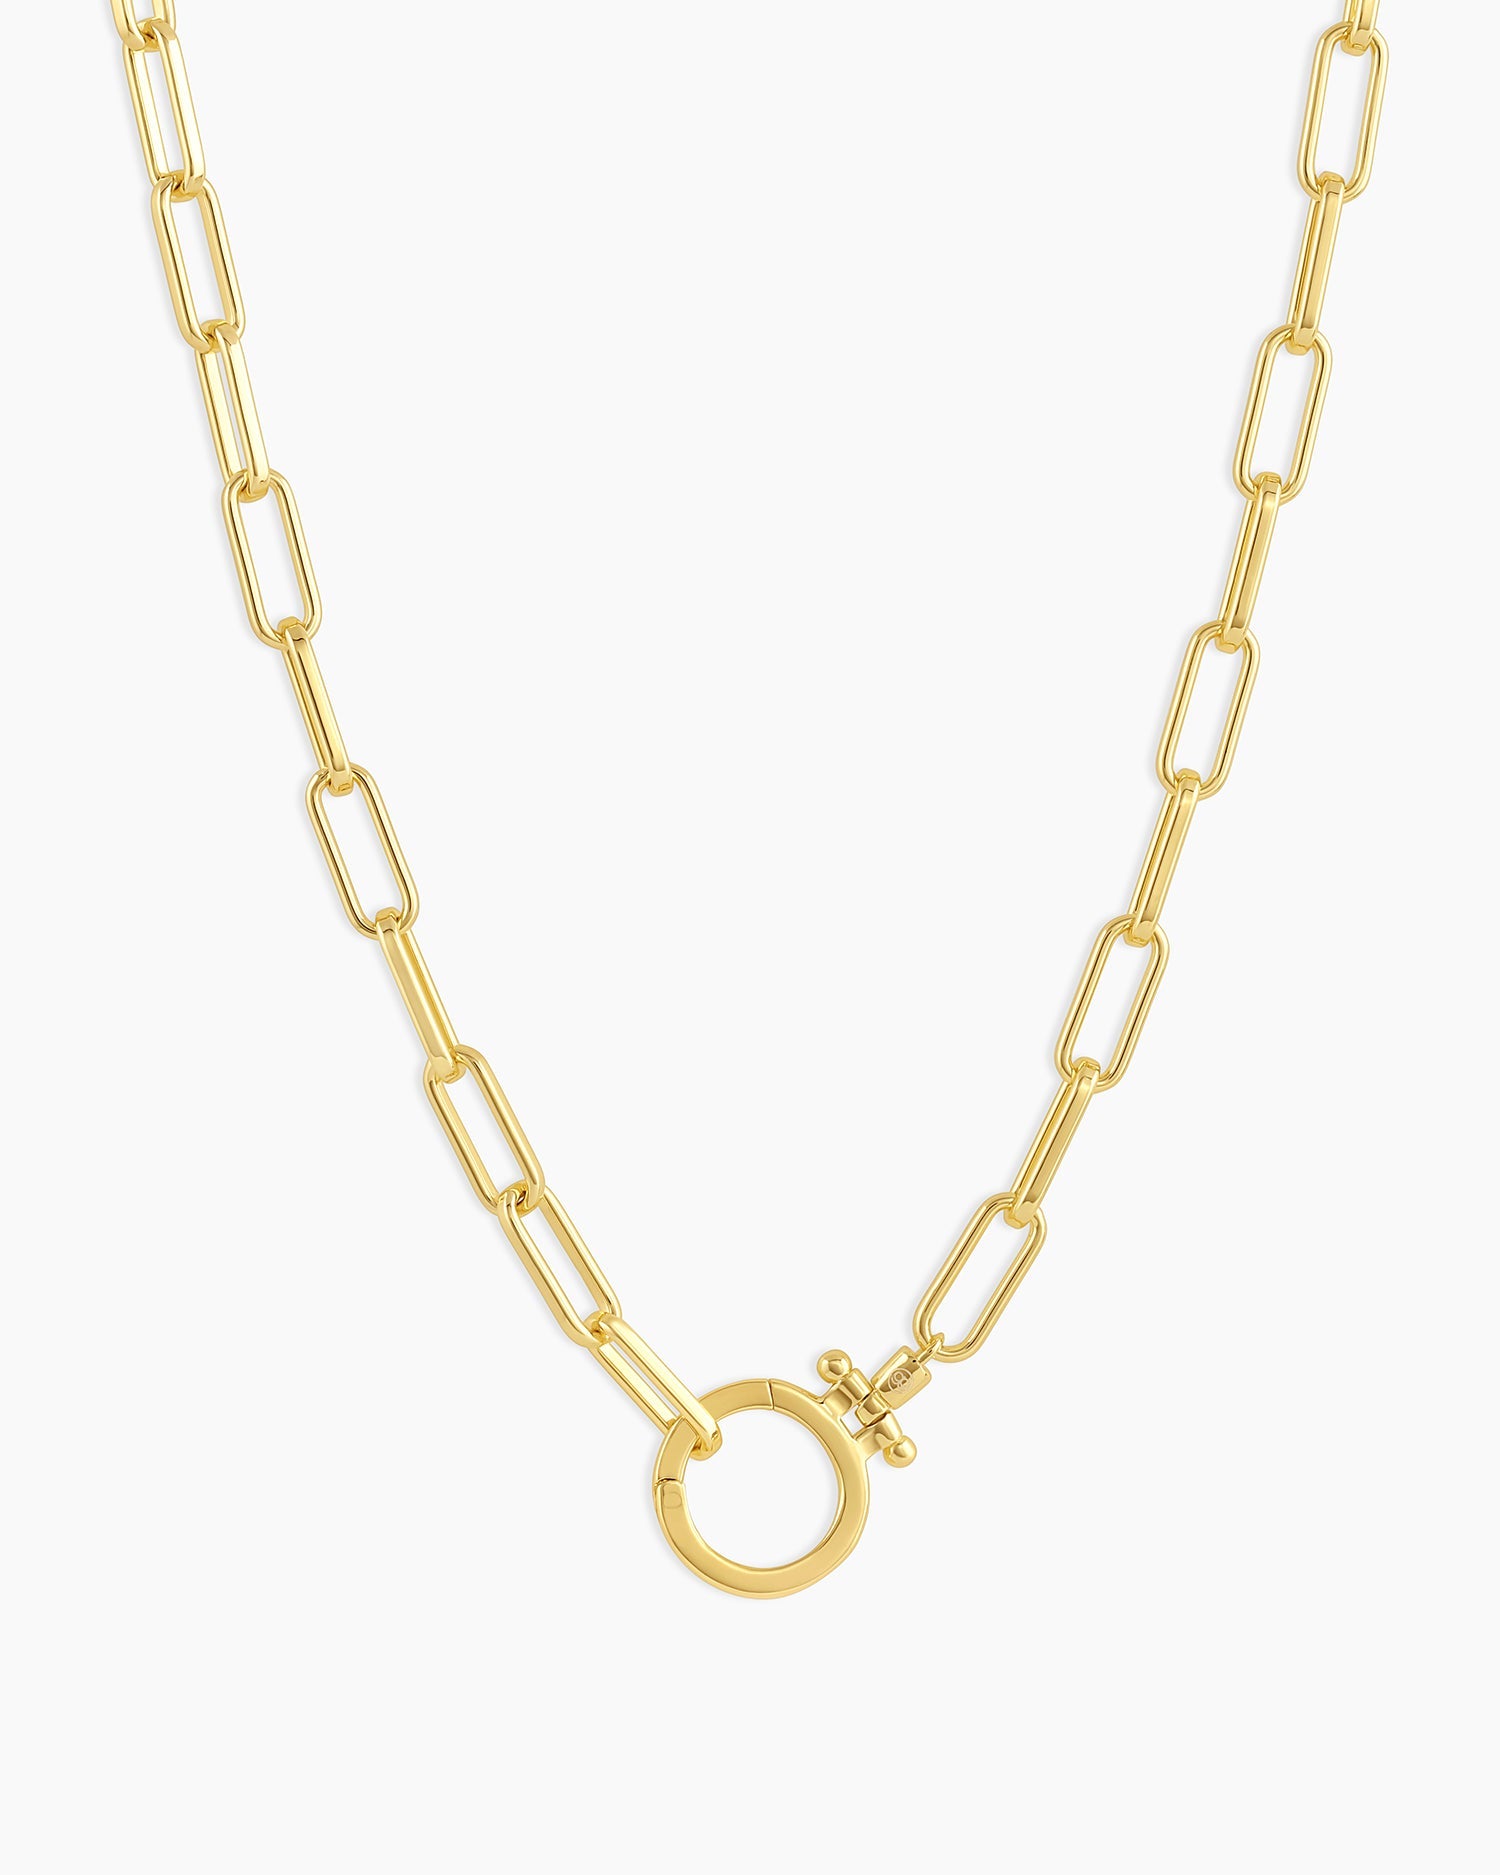 Gold Paperclip Chain Necklace | Chain necklace, Gold chain necklace, Gold